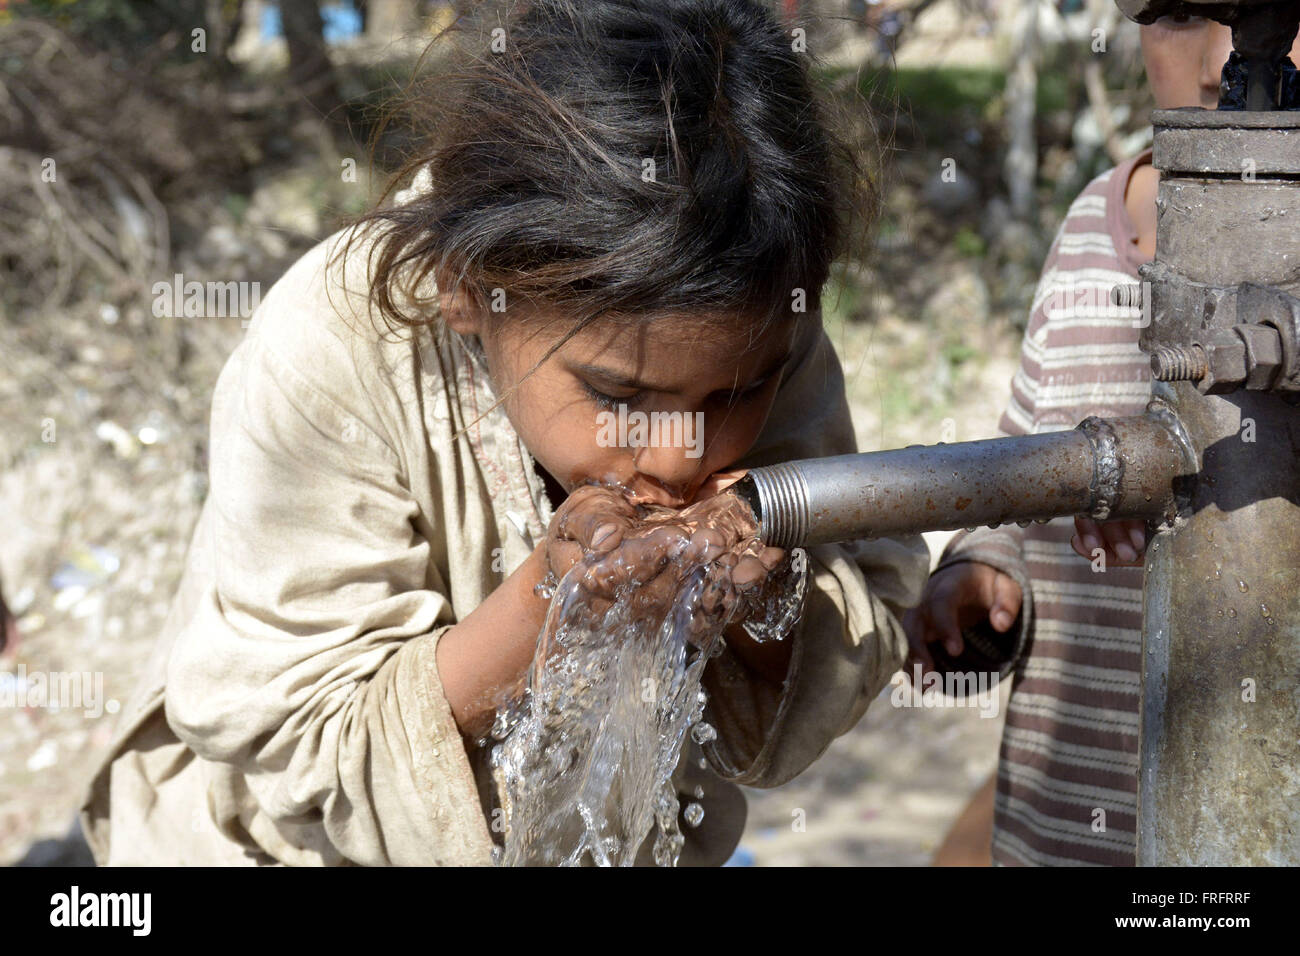 Lahore, Pakistan. 22nd Mar, 2016. A girl drinks water from a water hand pump at a makeshift settlement in Lahore, eastern Pakistan, on March 22, 2016. World Water Day is observed annually on March 22 as a means of highlighting the importance of fresh water. © Sajjad/Xinhua/Alamy Live News Stock Photo